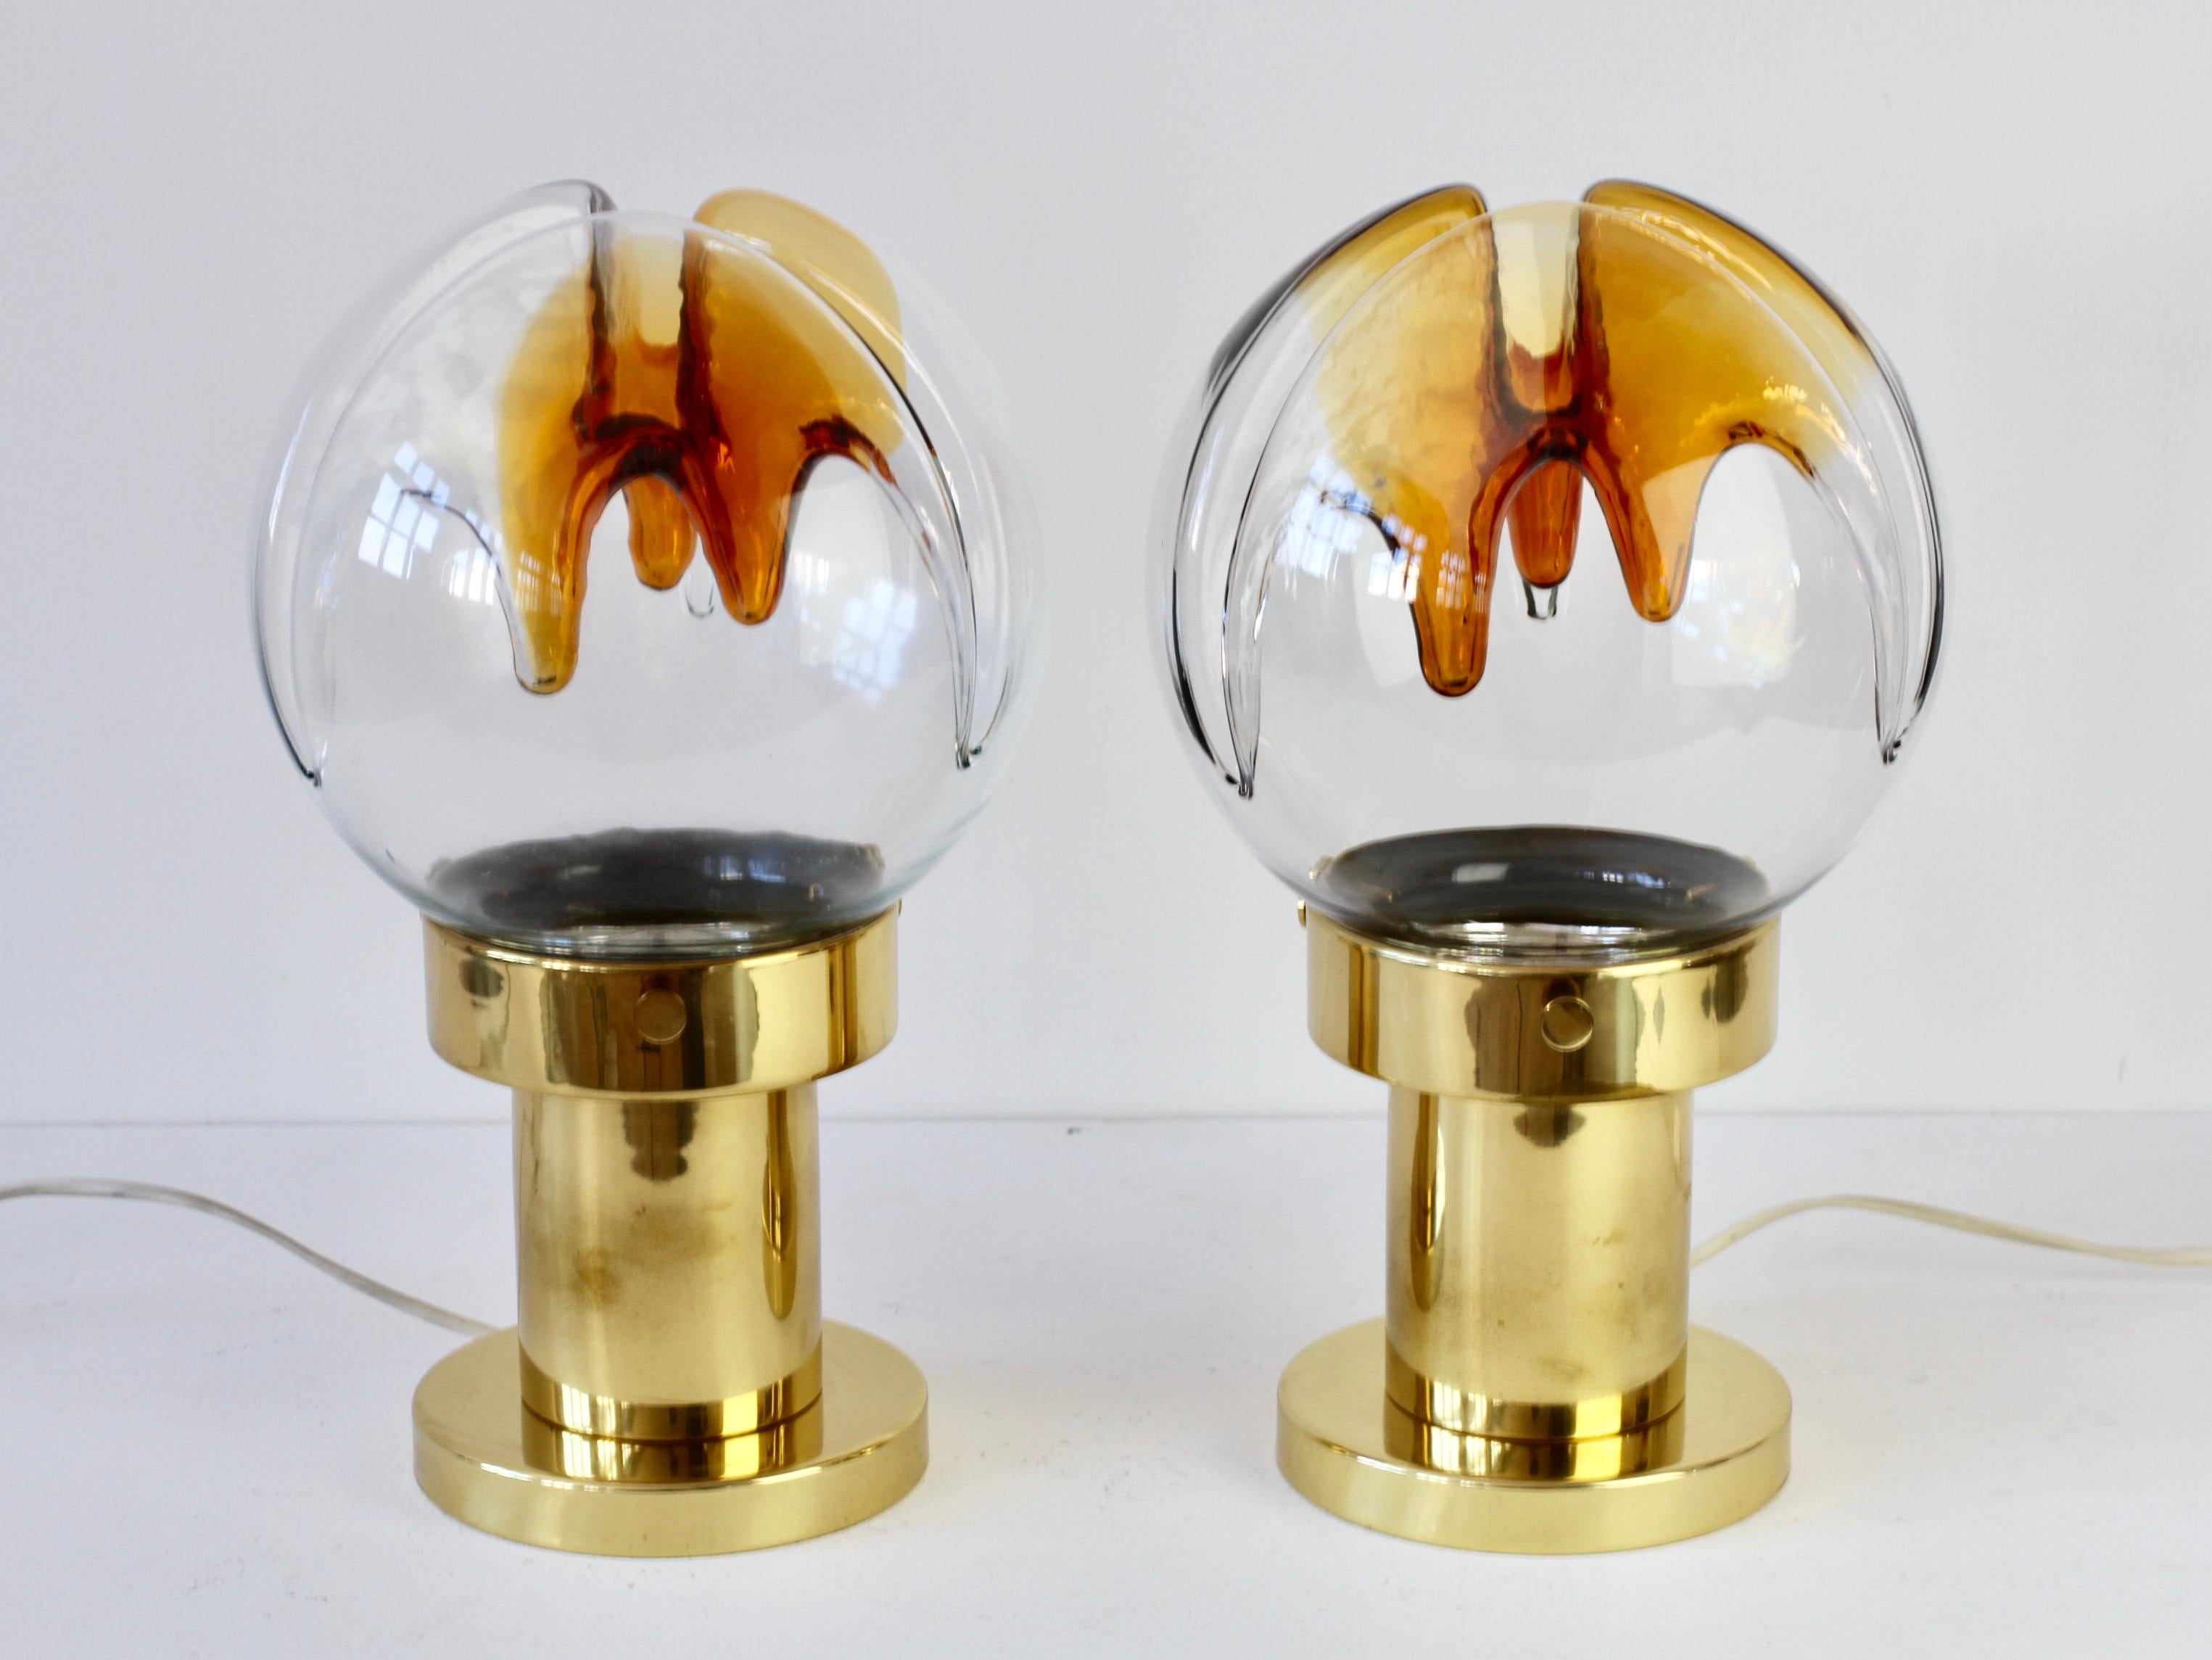 Molded Rare Pair of Large Italian Textured Murano Glass Table Lamps by Kaiser Leuchten For Sale